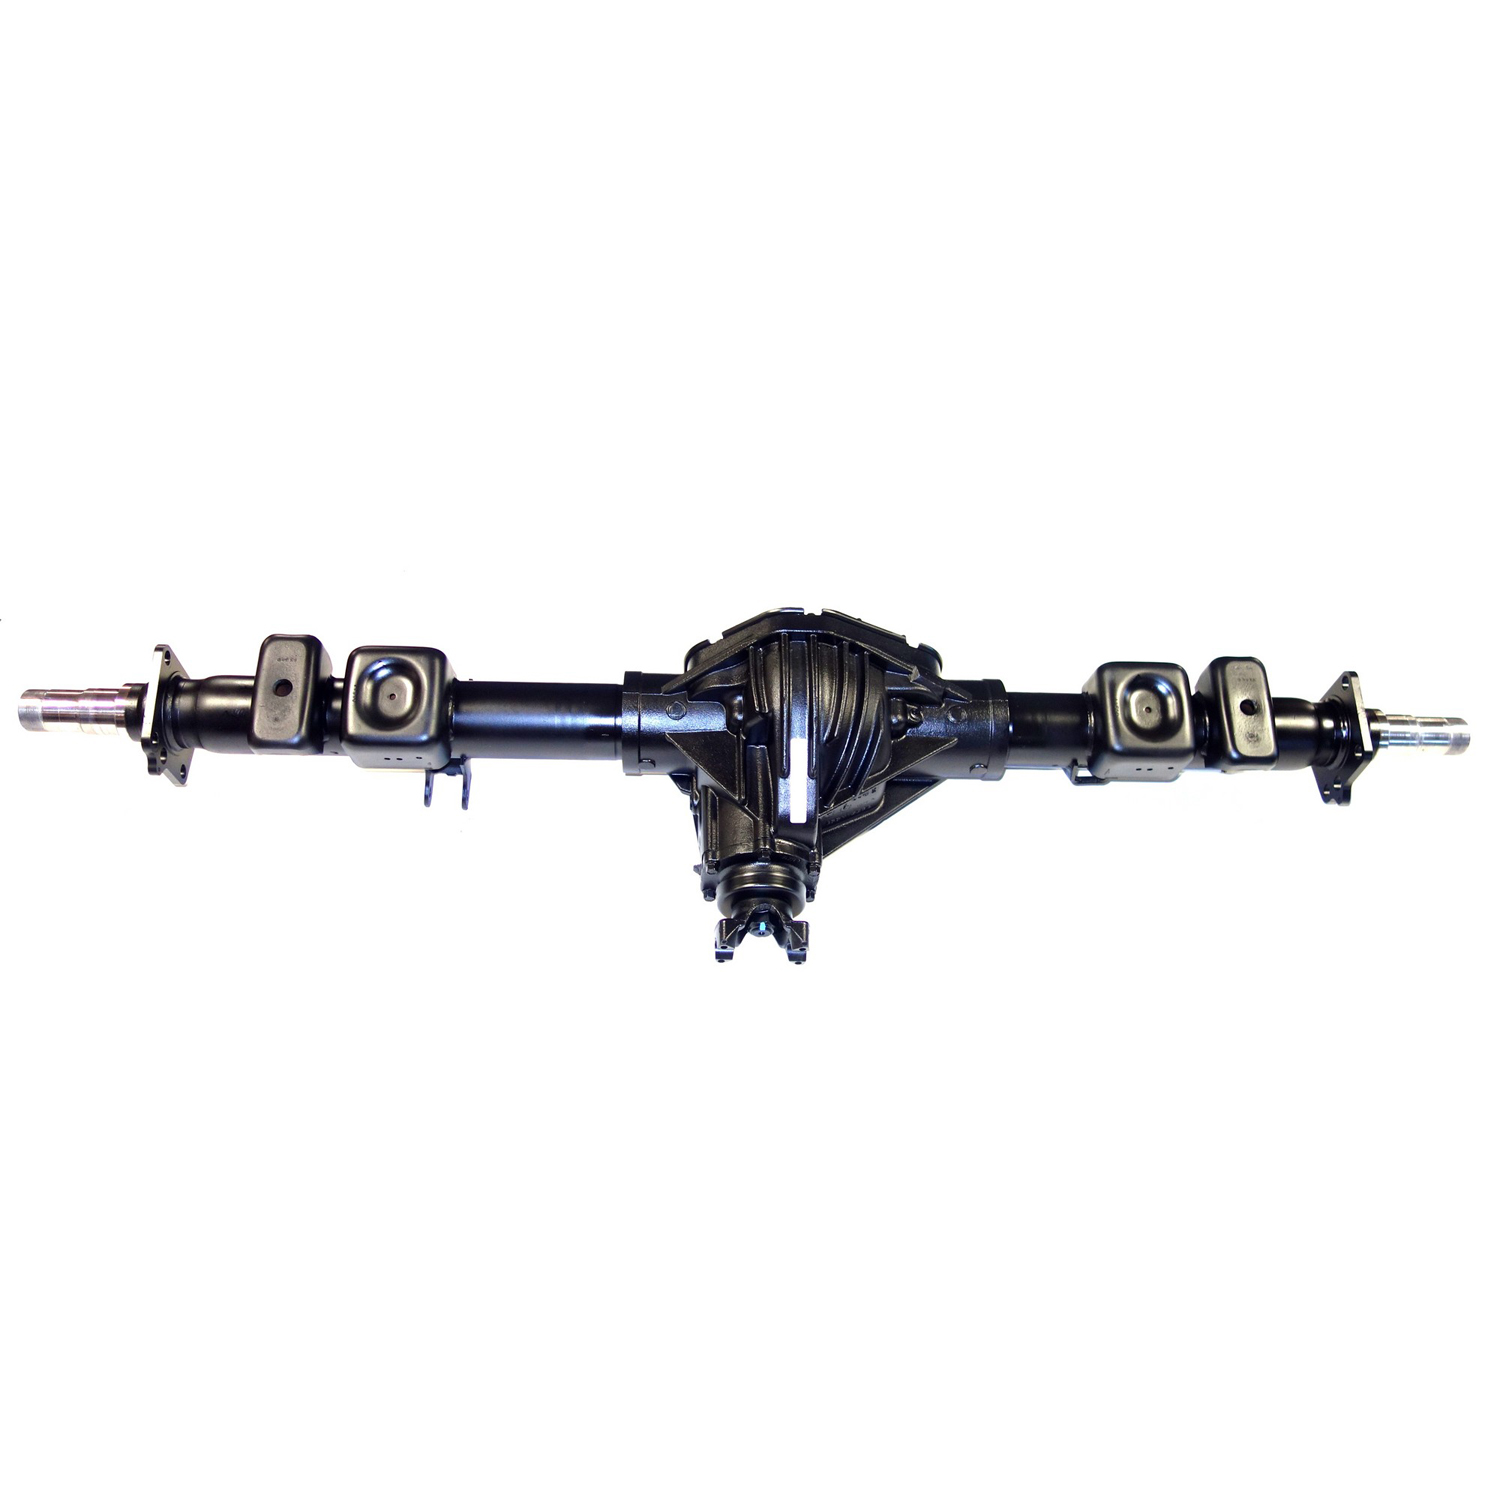 Remanufactured Axle Assy for GM 14 Bolt Truck 09-10 GM 2500 w/ Active Brake 4.10 Posi LSD